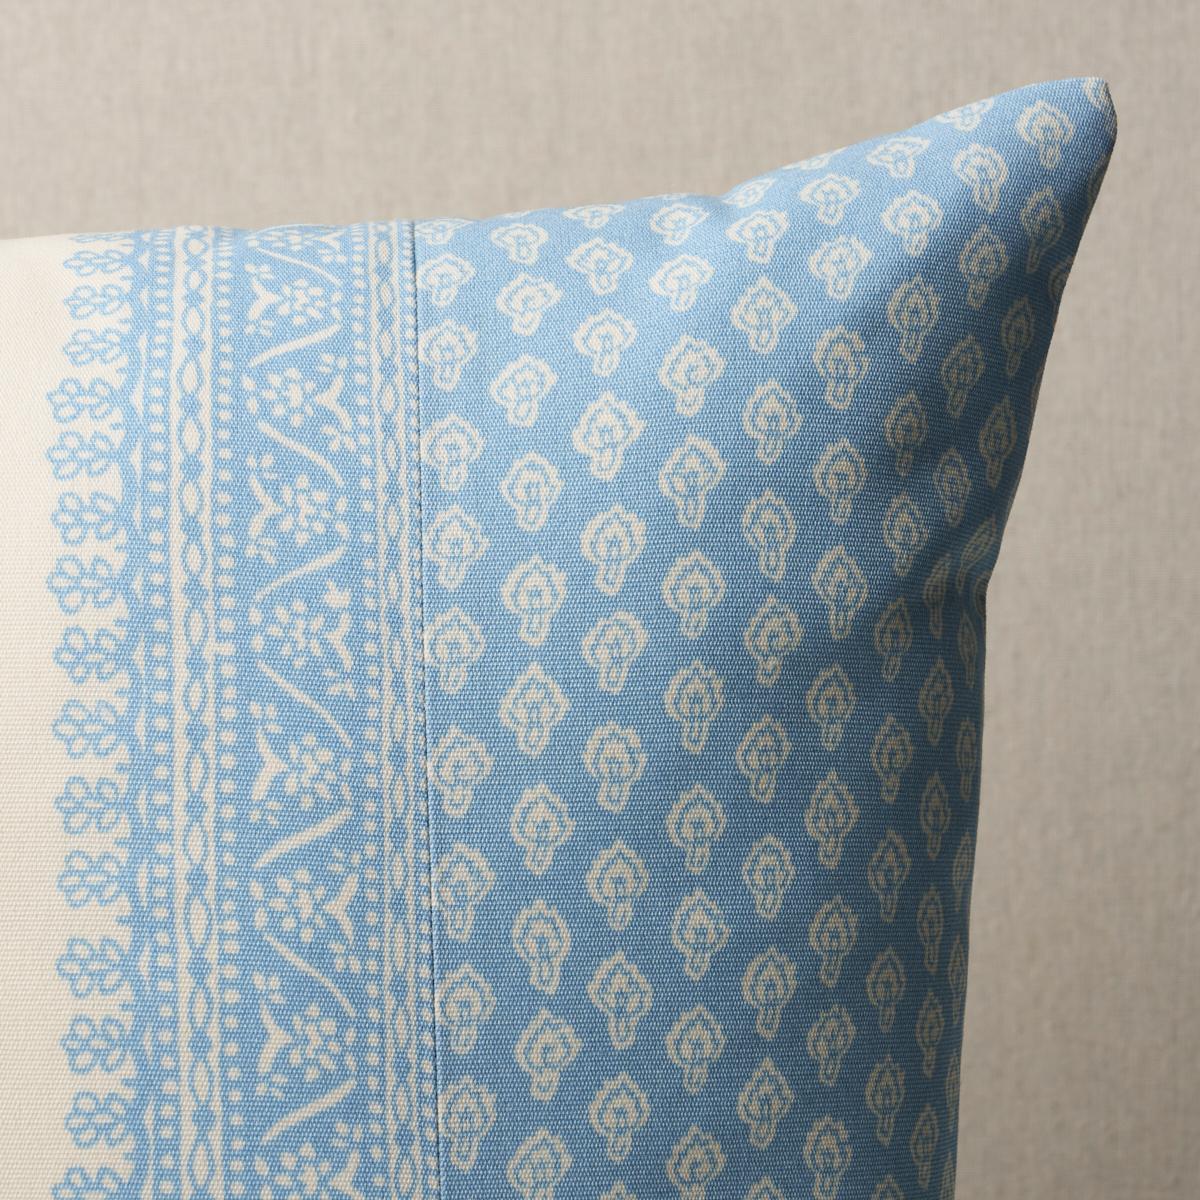 This pillow features Hyacinth Indoor/Outdoor by Mark D. Sikes with a knife edge finish. Inspired by traditional Indian block prints, Hyacinth Indoor/Outdoor in leaf green by Mark D. Sikes is a stylish high-performance fabric that can stand up to the